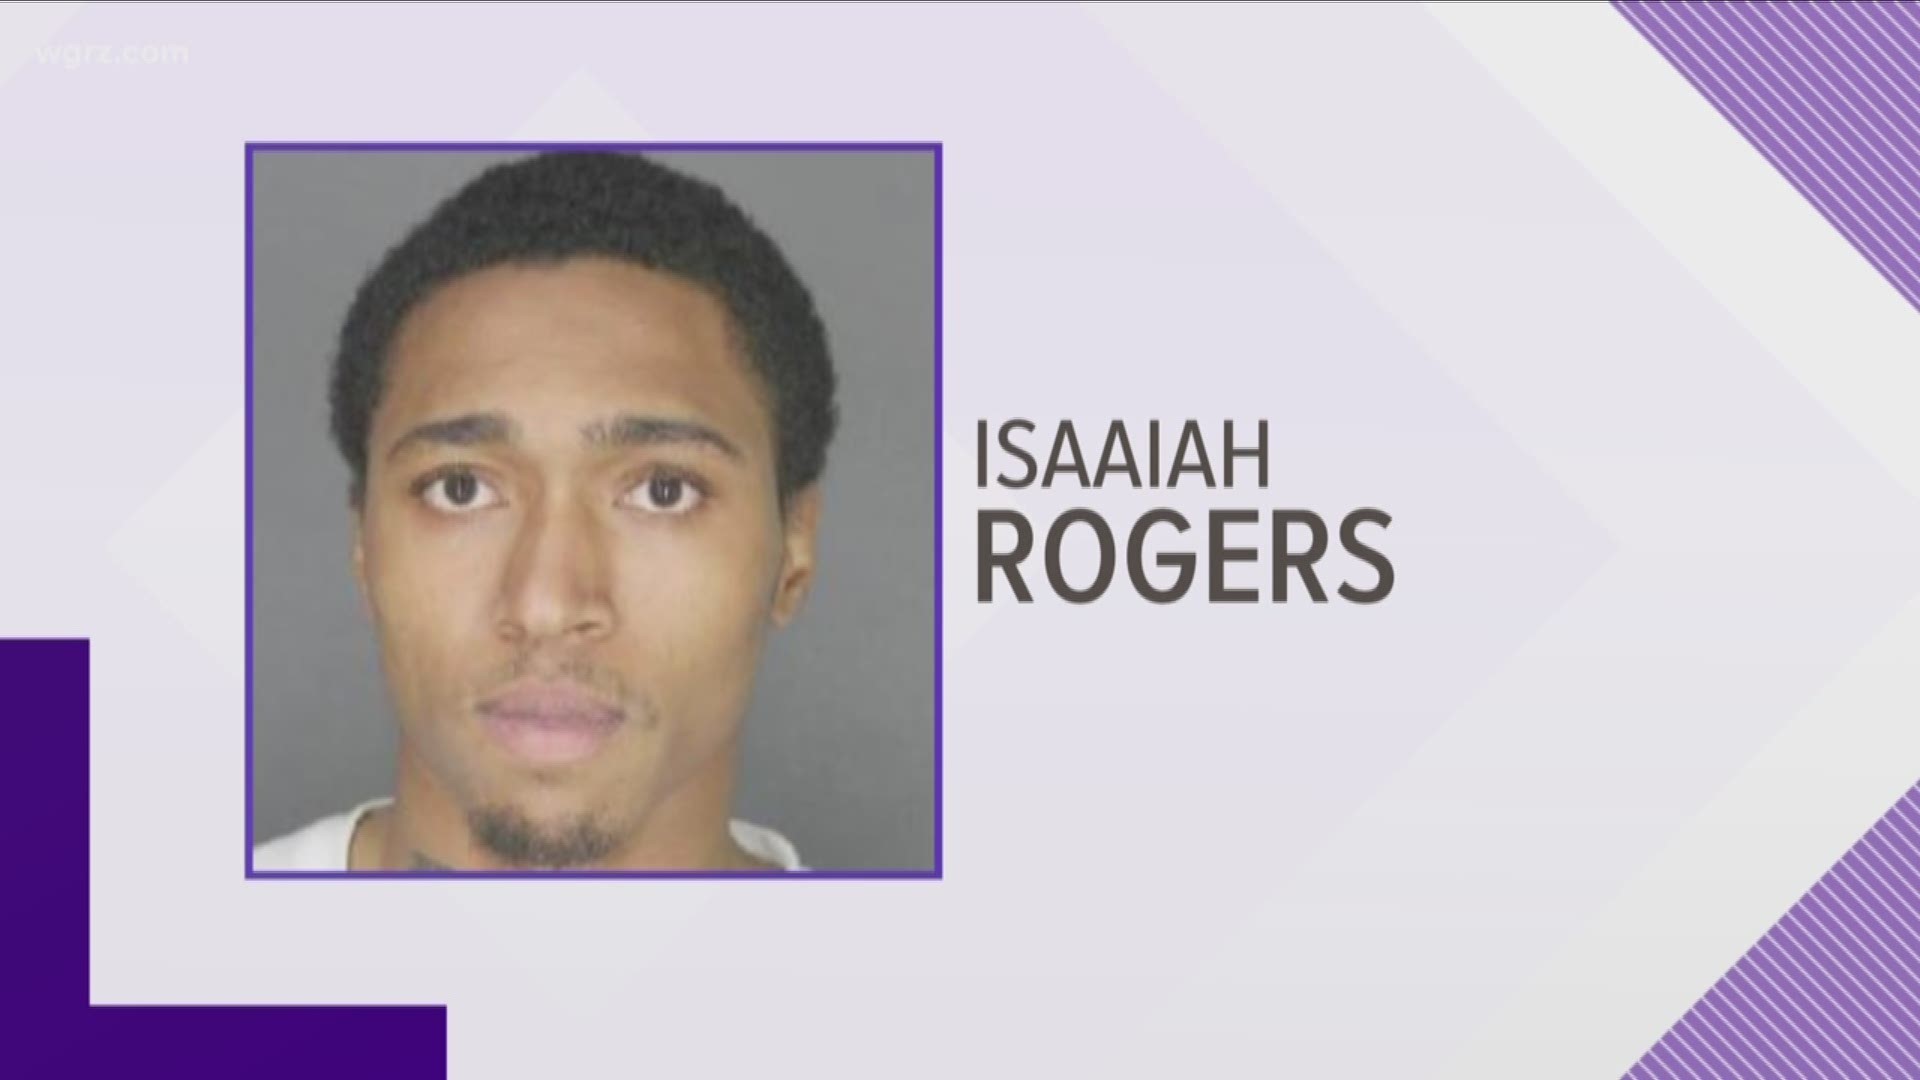 Isaaiah Rogers gets 25 years in prison for killing  a man in the city.